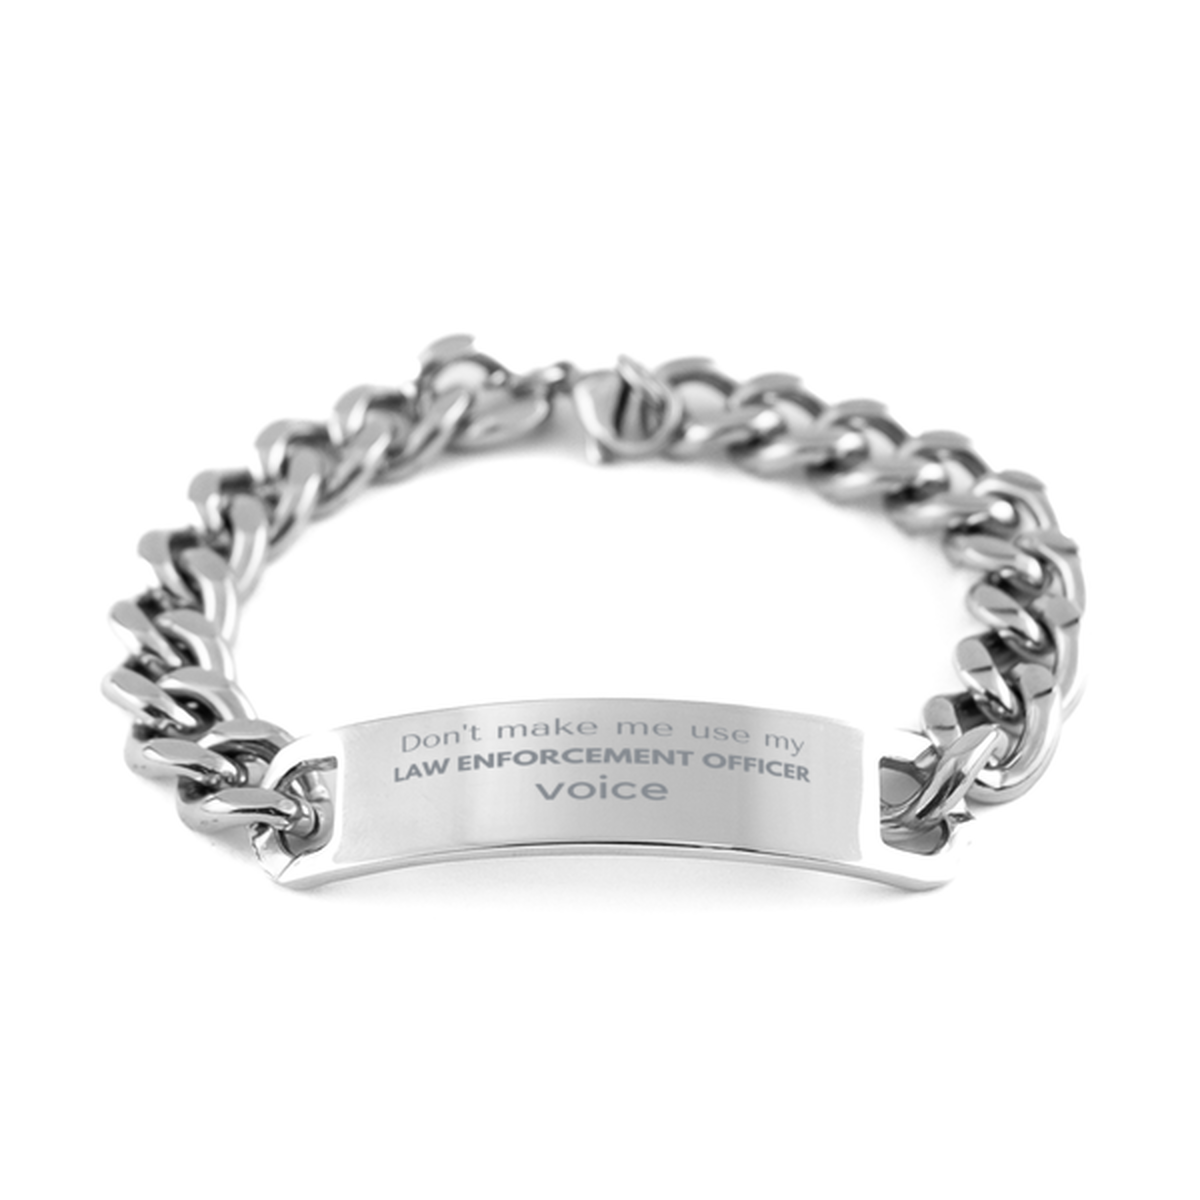 Don't make me use my Law Enforcement Officer voice, Sarcasm Law Enforcement Officer Gifts, Christmas Law Enforcement Officer Cuban Chain Stainless Steel Bracelet Birthday Unique Gifts For Law Enforcement Officer Coworkers, Men, Women, Colleague, Friends